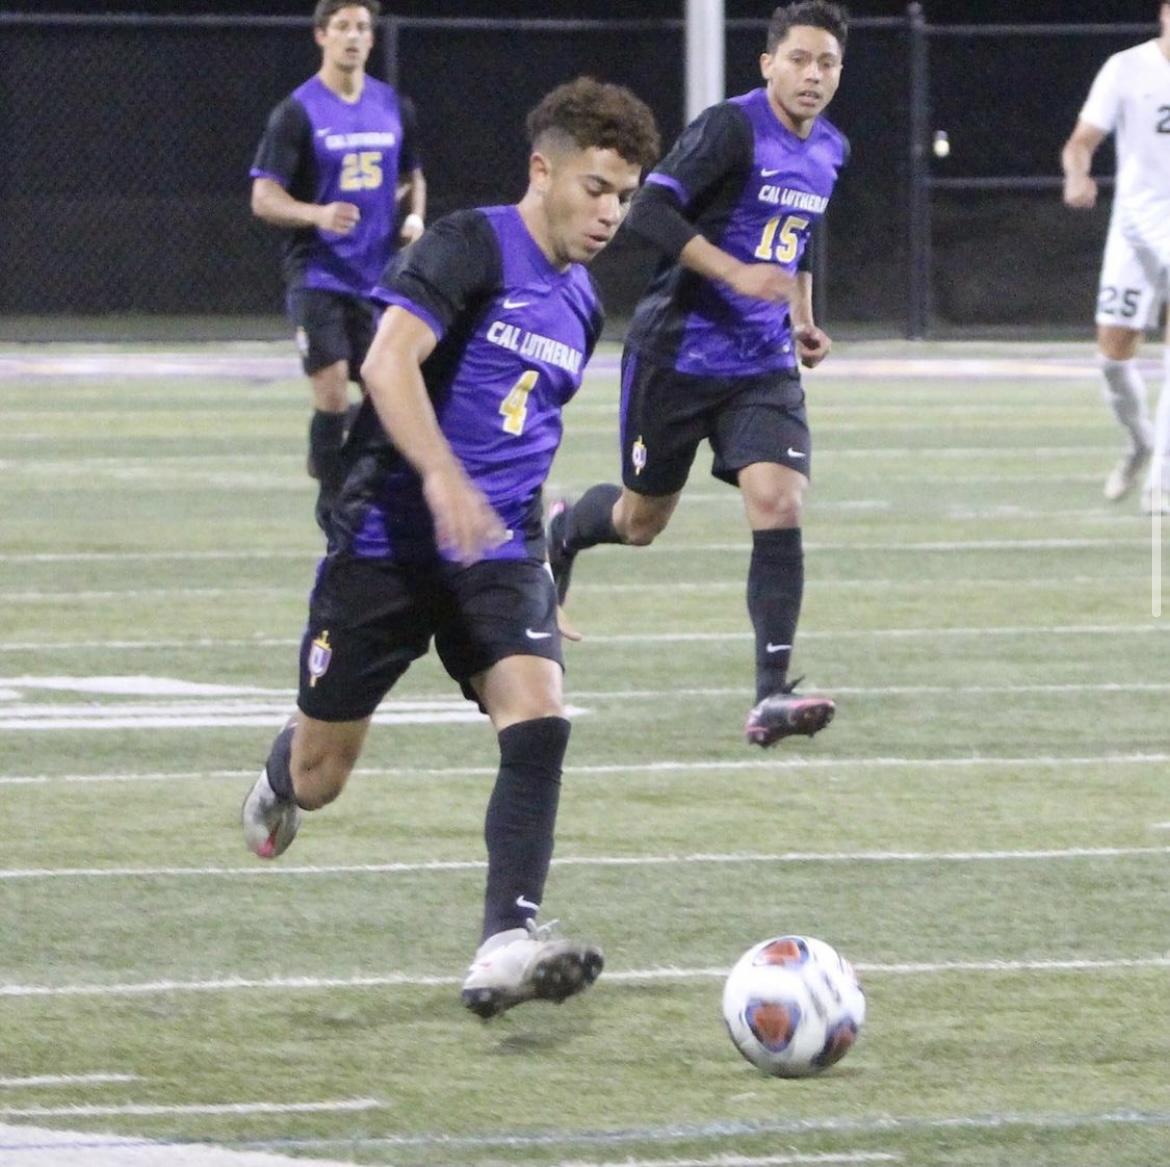 Kingsmen Keep a Clean Slate Against the Leopards in a 2-0 Win